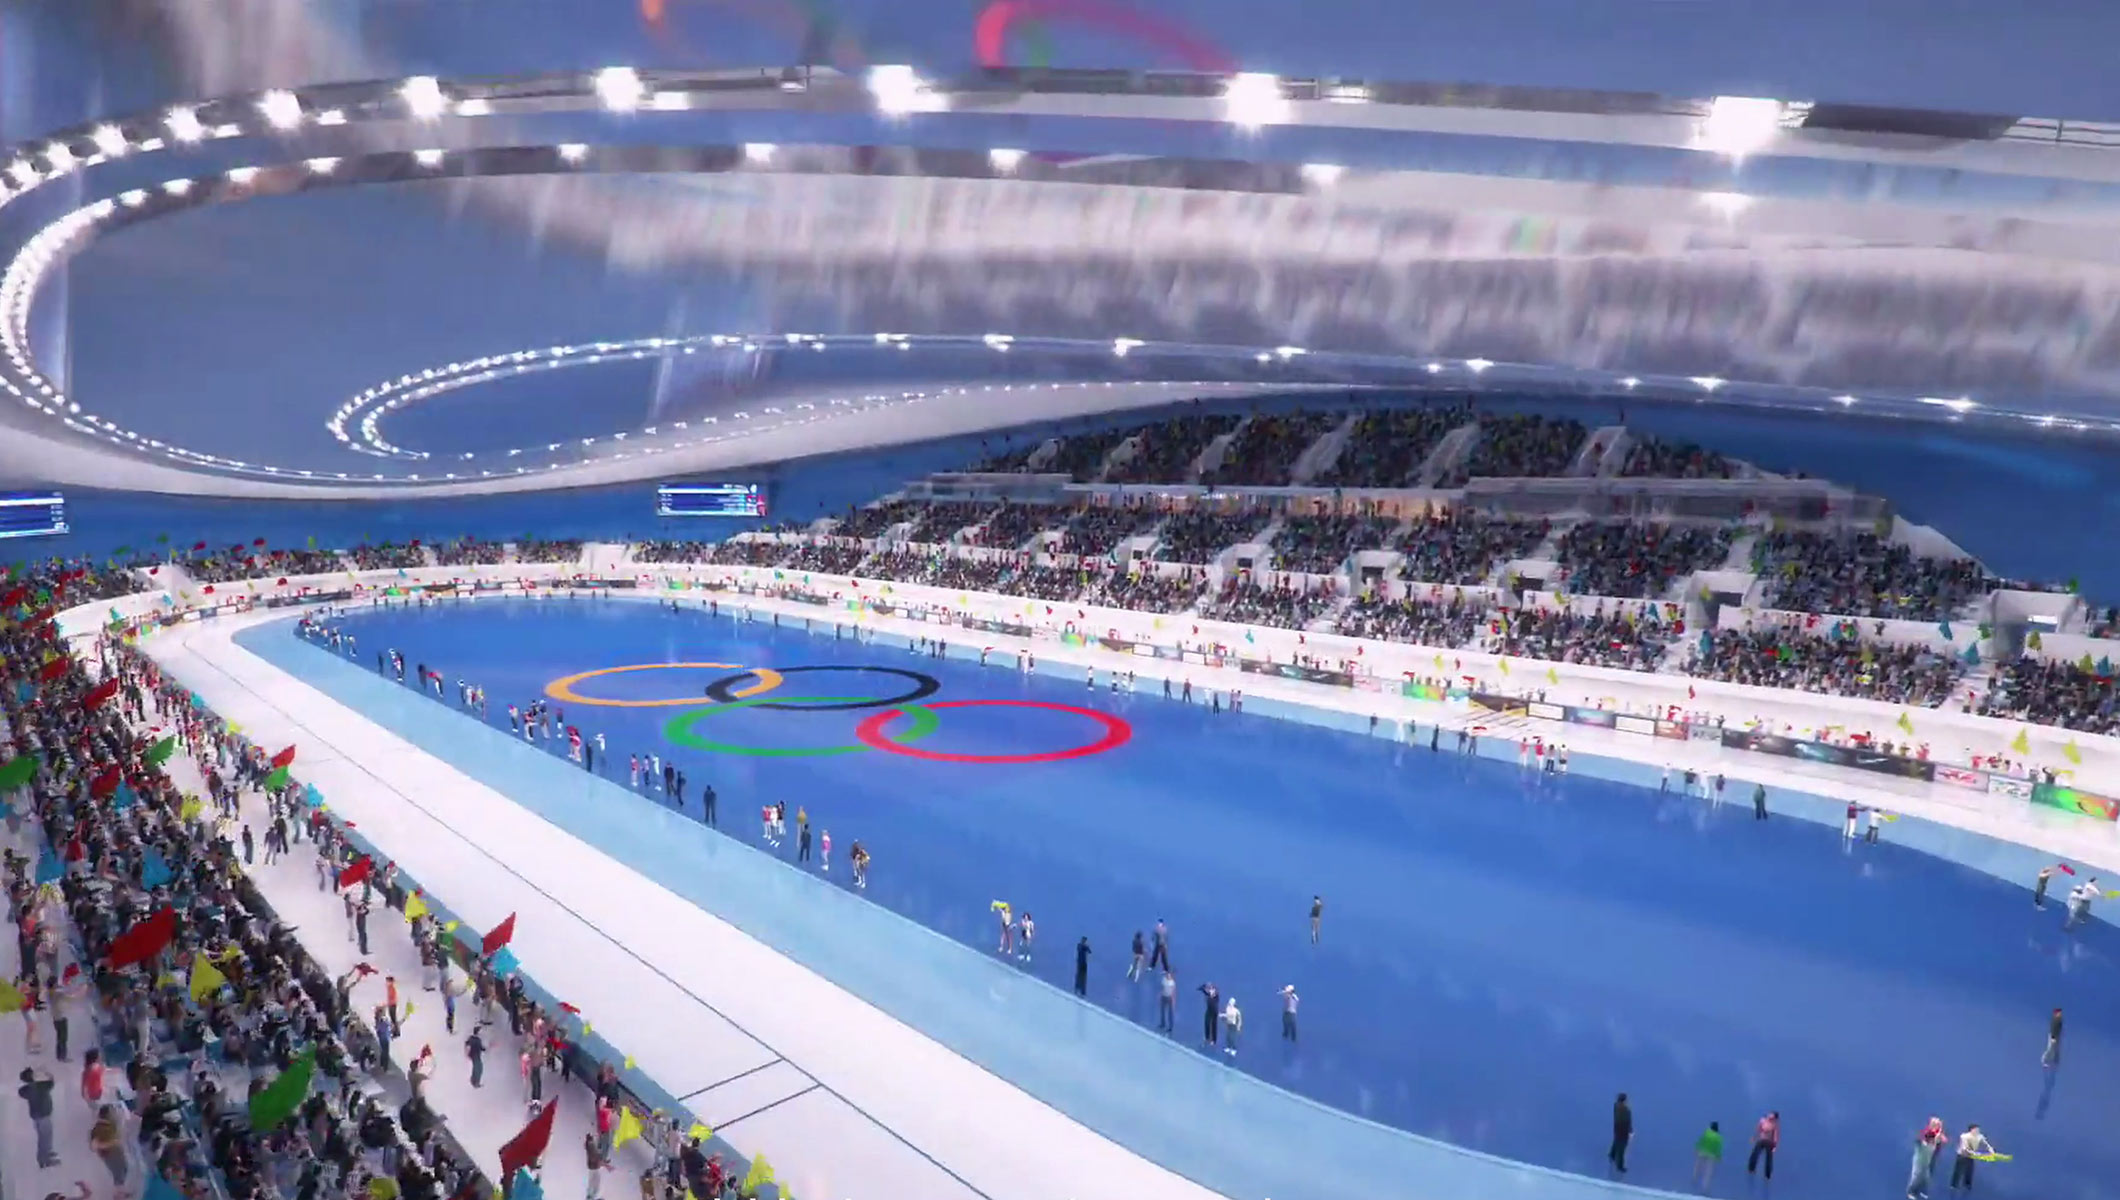 Beijing 2022 Ice Venue Cooling System To Reduce Carbon Footprint Of Olympic Games Olympic News